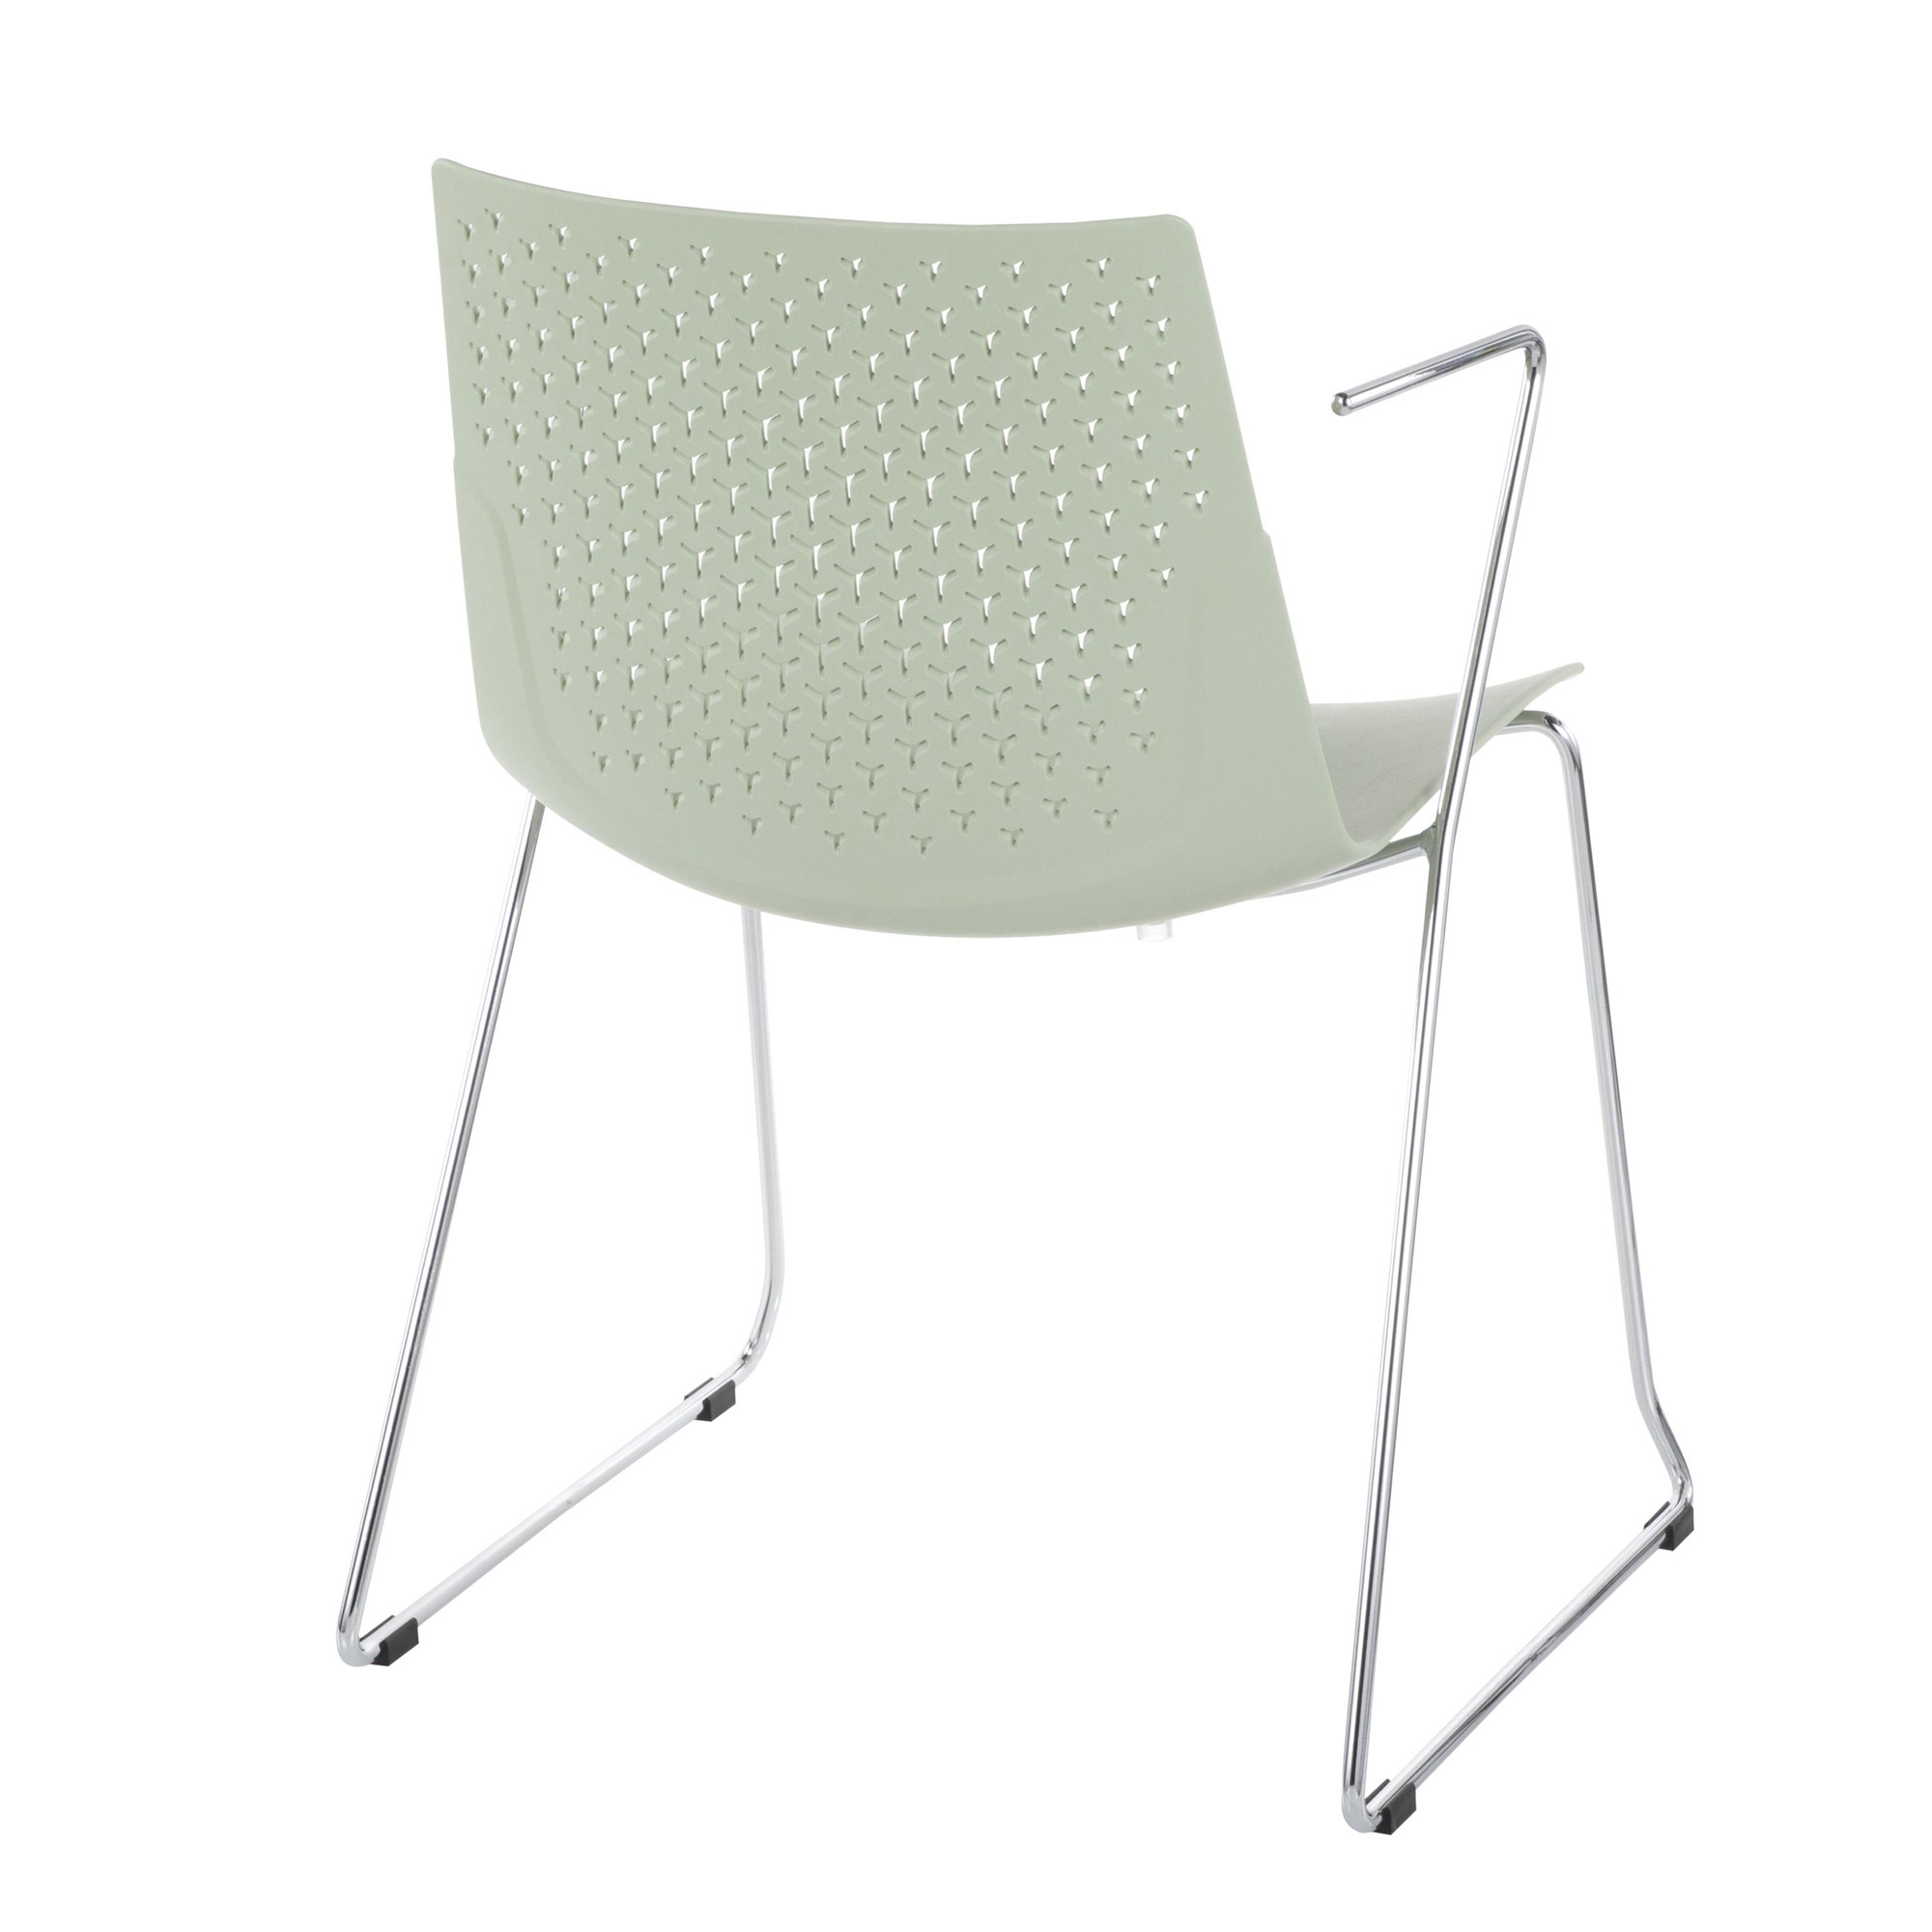 Contemporary Home Living Set of 2 Stainless Steel and Green Contemporary Chair 32”